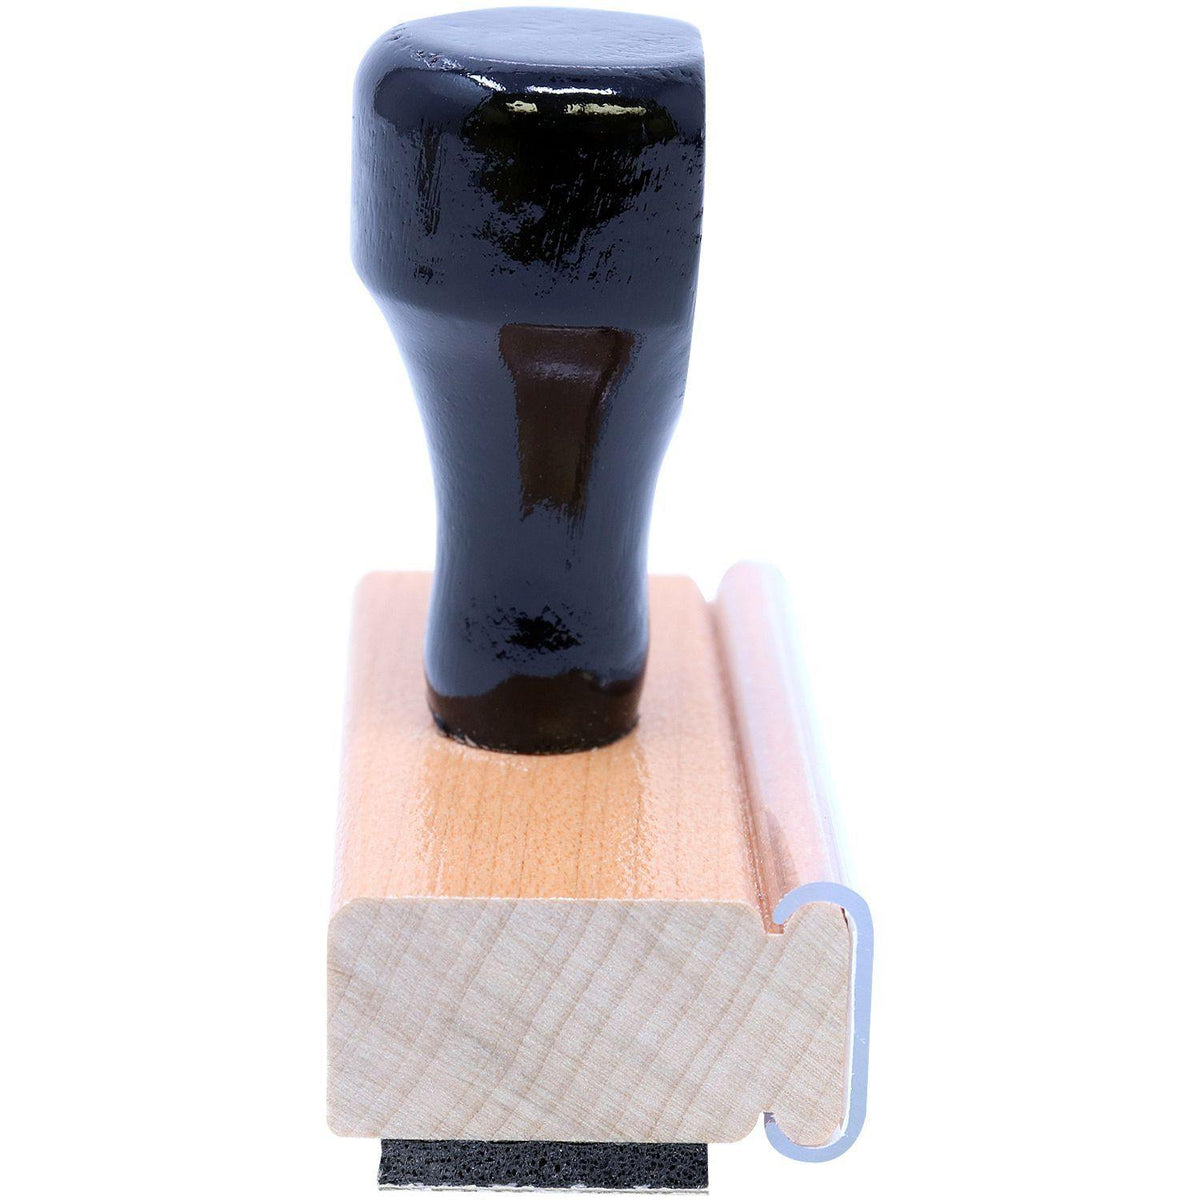 Narrow Font Confidential Rubber Stamp - Engineer Seal Stamps - Brand_Acorn, Impression Size_Small, Stamp Type_Regular Stamp, Type of Use_Finance, Type of Use_Legal, Type of Use_Office